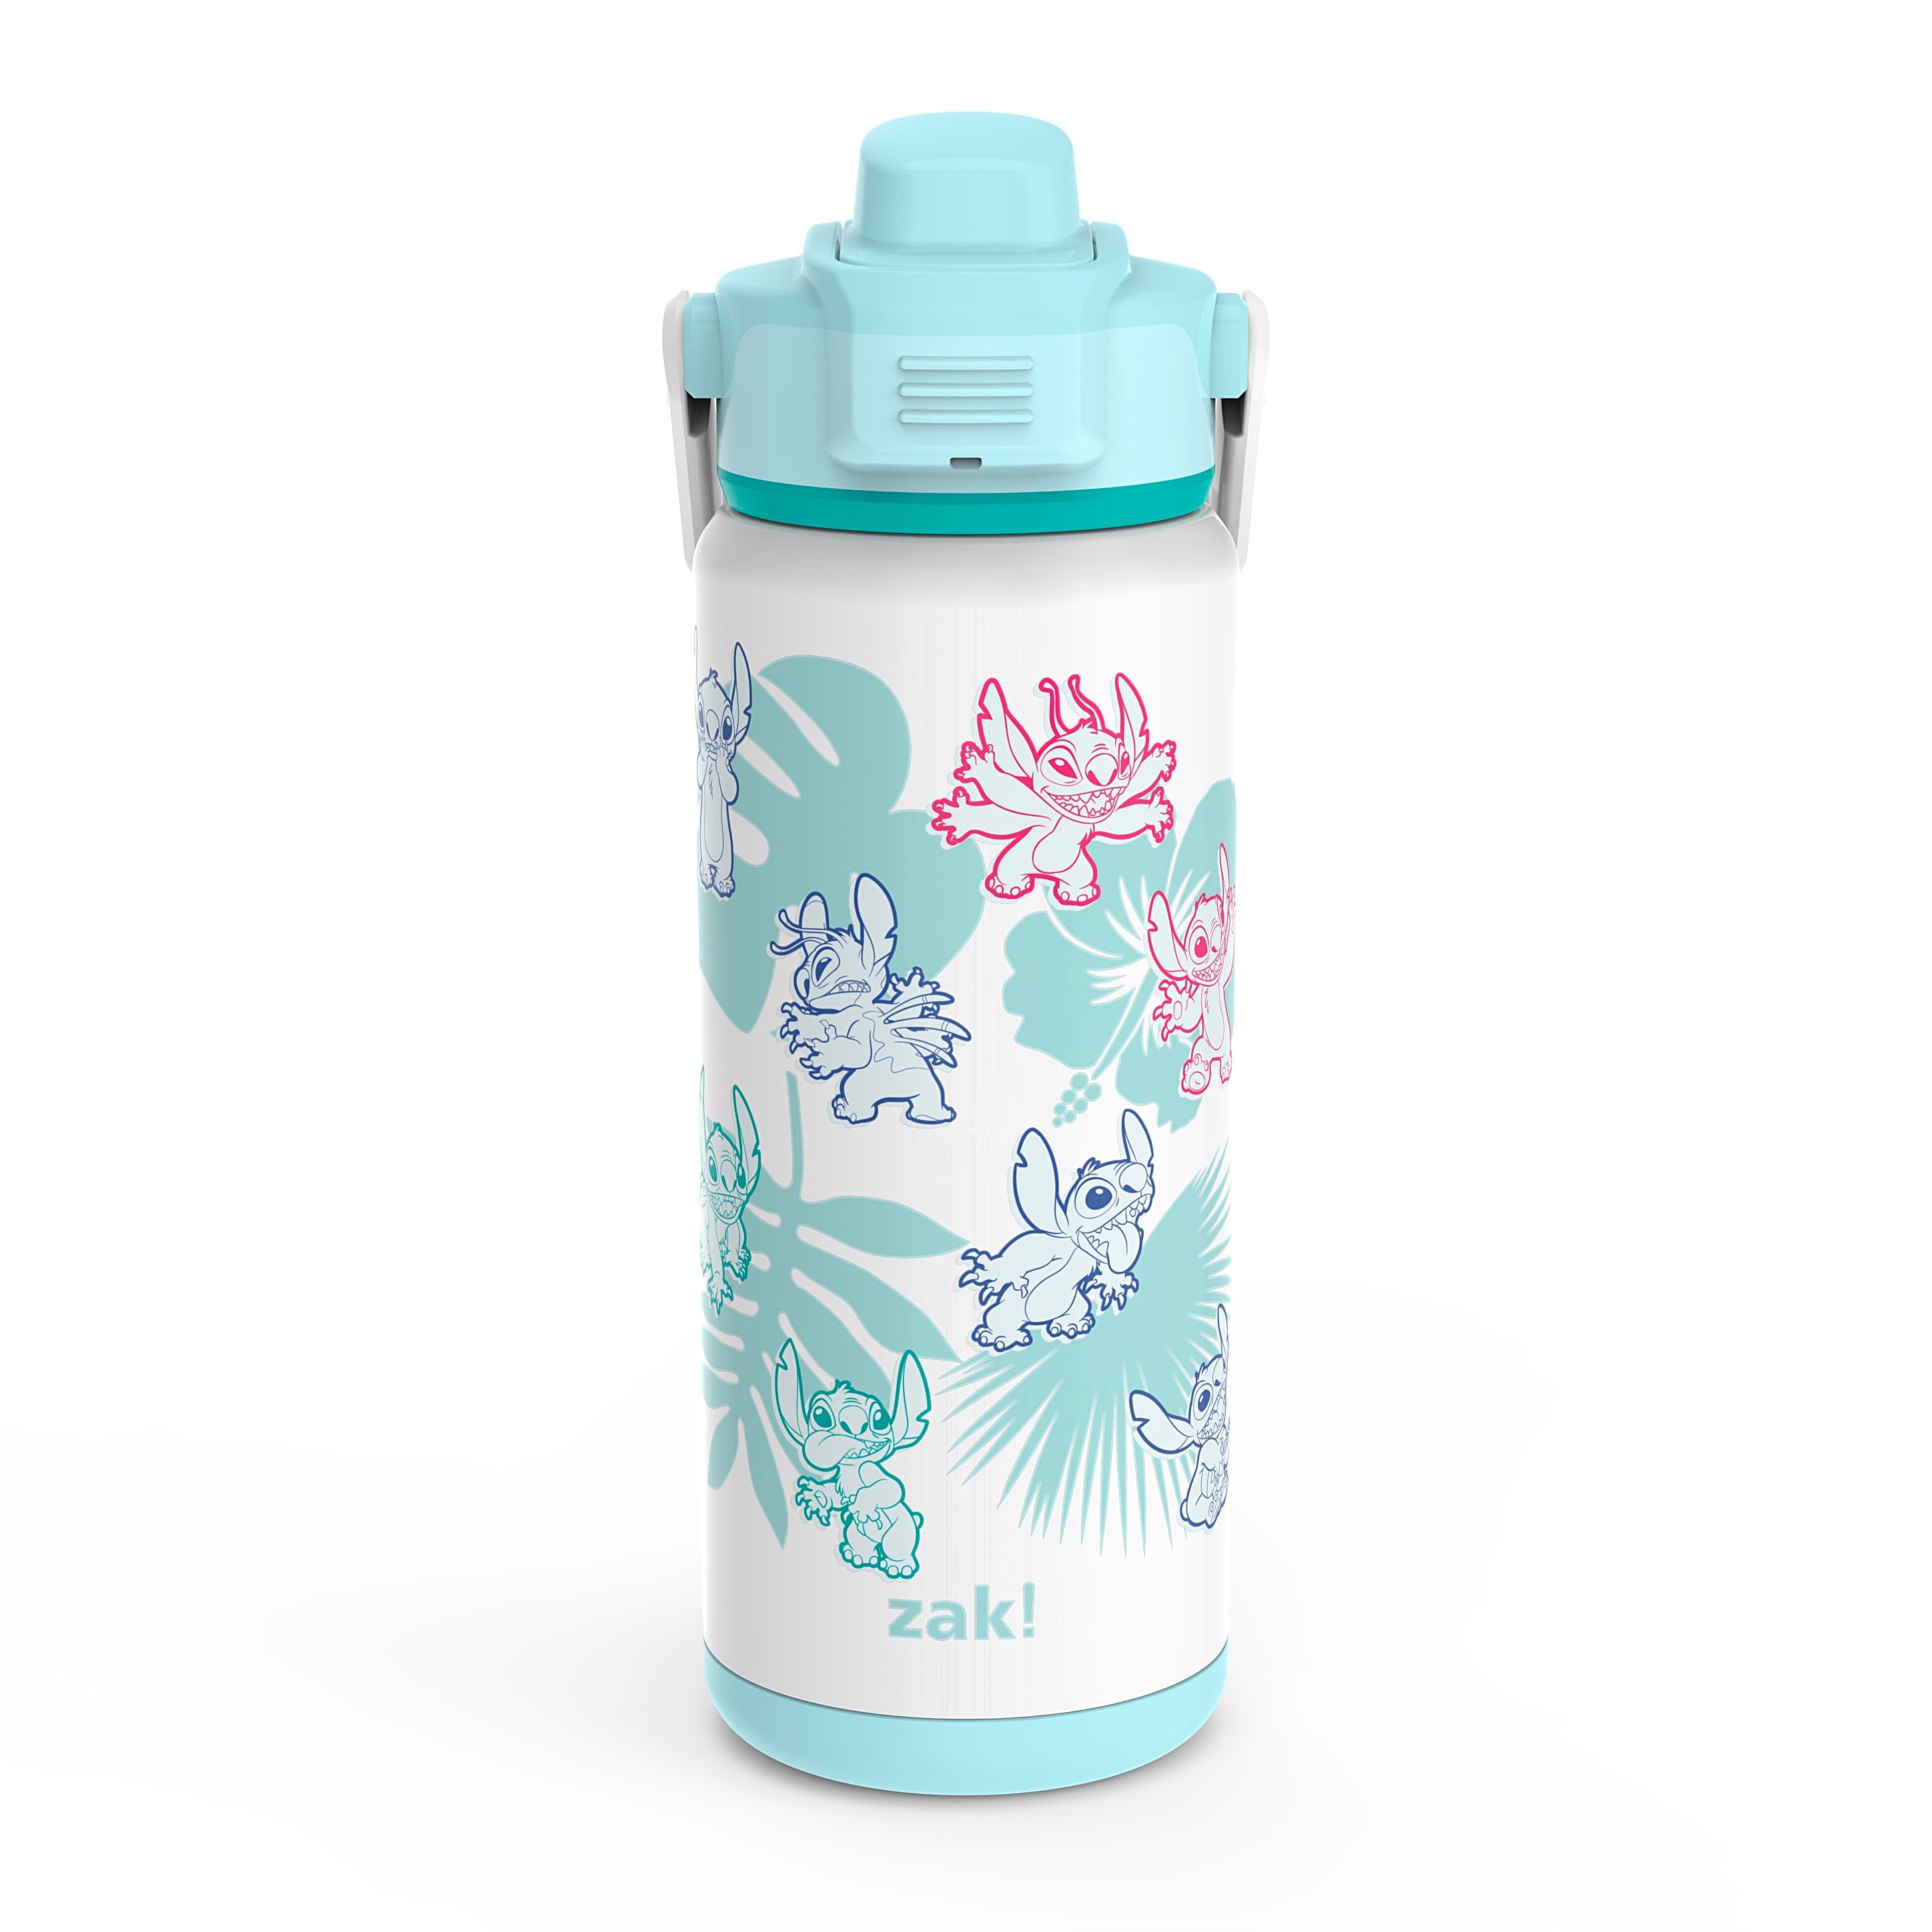 Disney Lilo & Stitch Beacon Stainless Steel Insulated Kids Water Bottle with Covered Spout, 20 Ounces